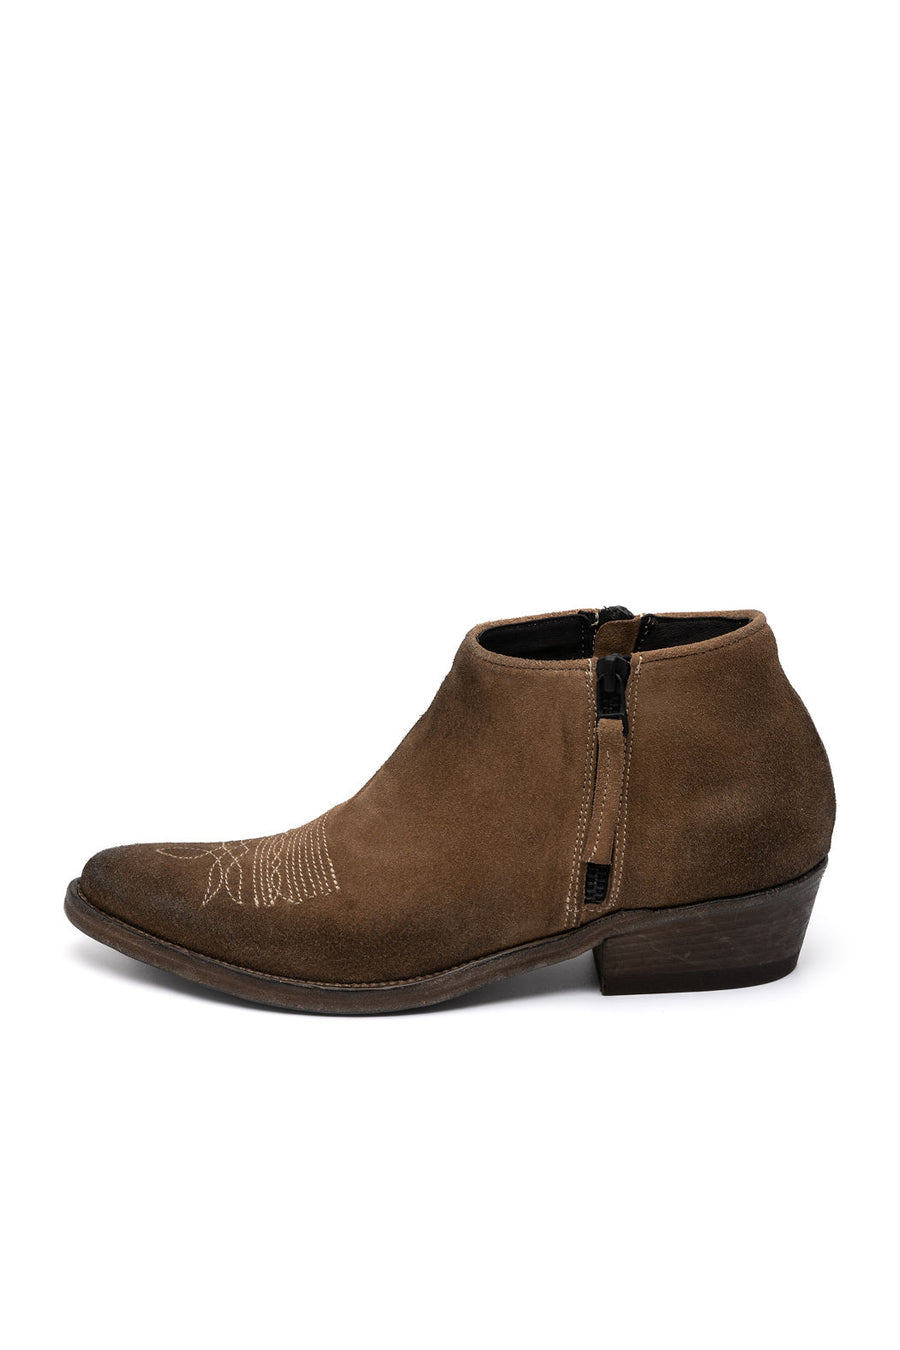 MORGAN Keep Tan Booties with White Stitch